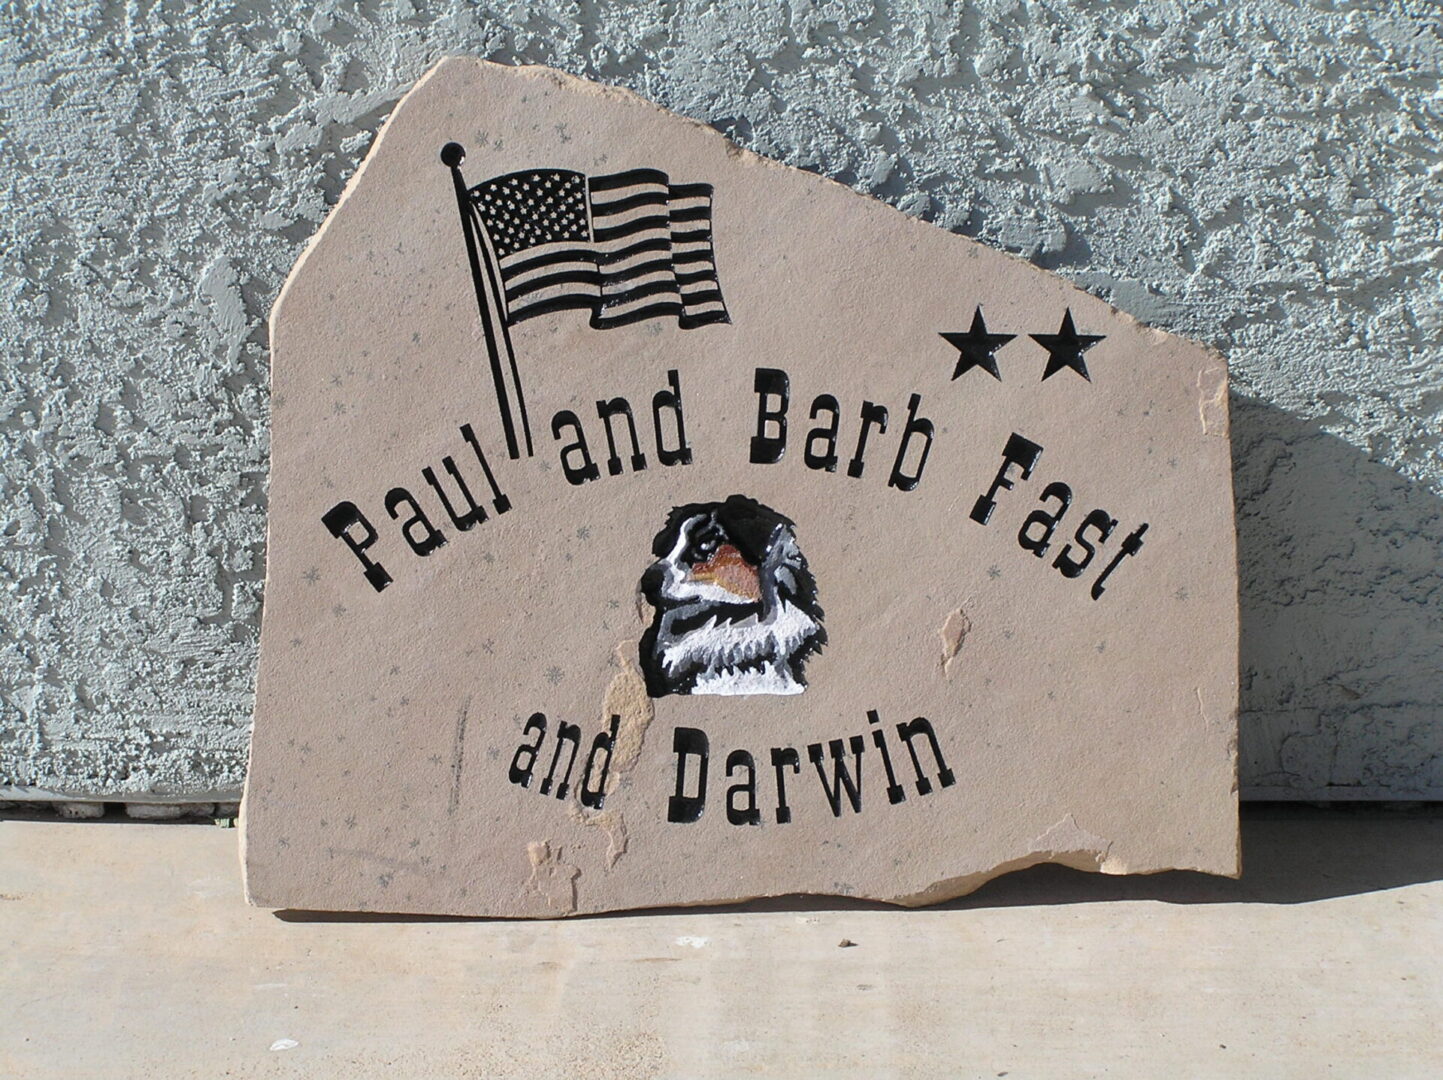 Paul and Barb Fast and Darwin Flagston